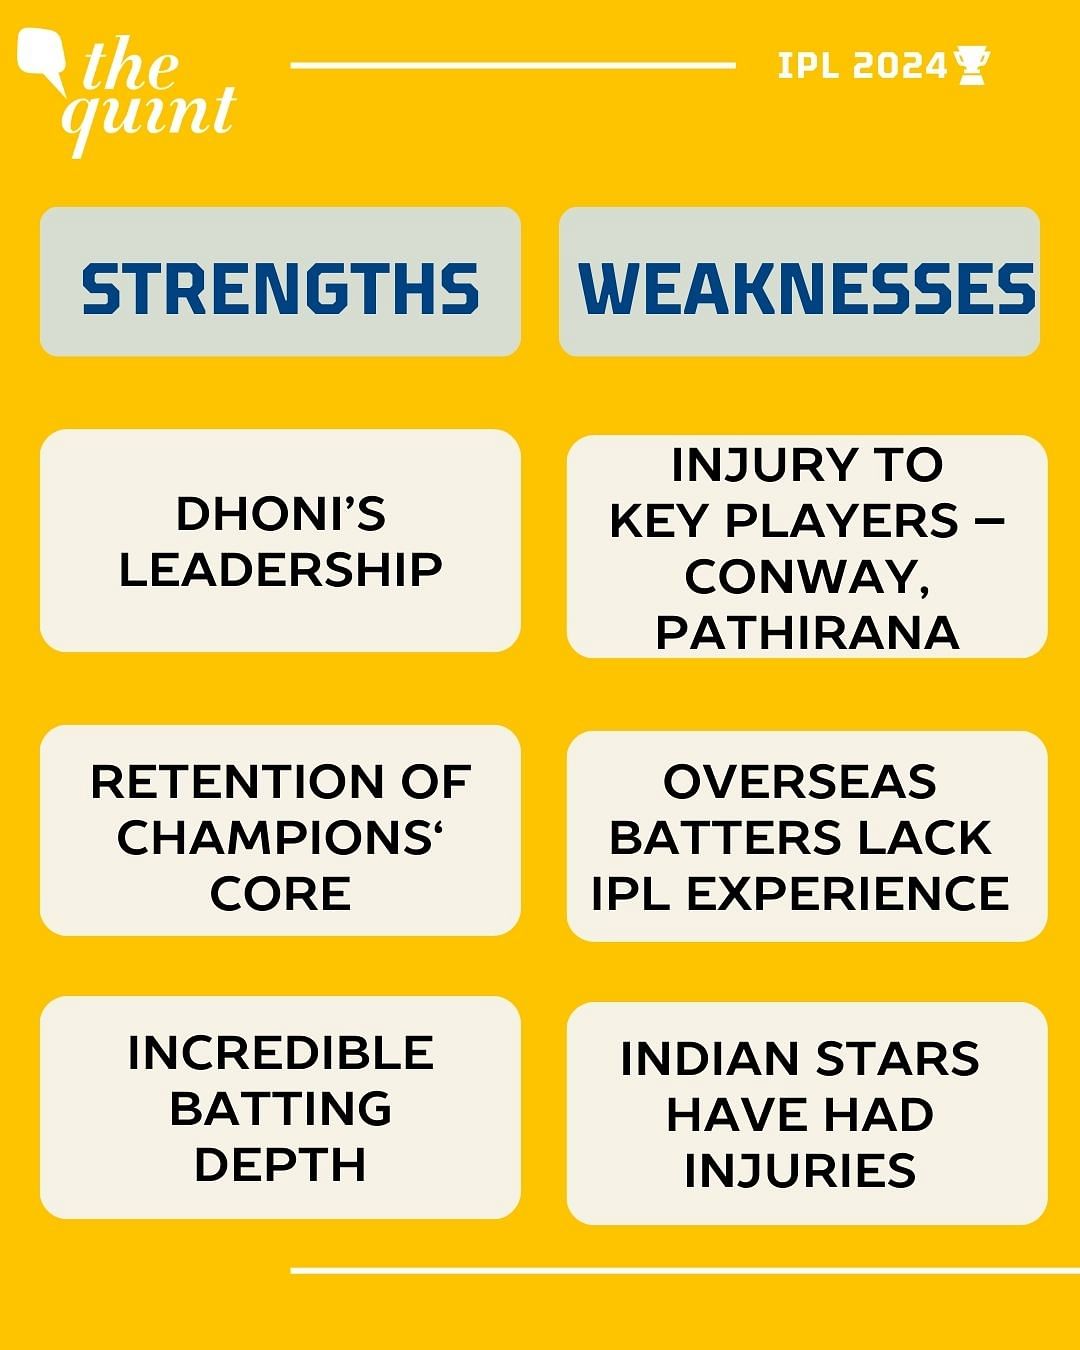 IPL 2024: In the first part of our two-part analysis of every team, we take a detailed look at five squads.